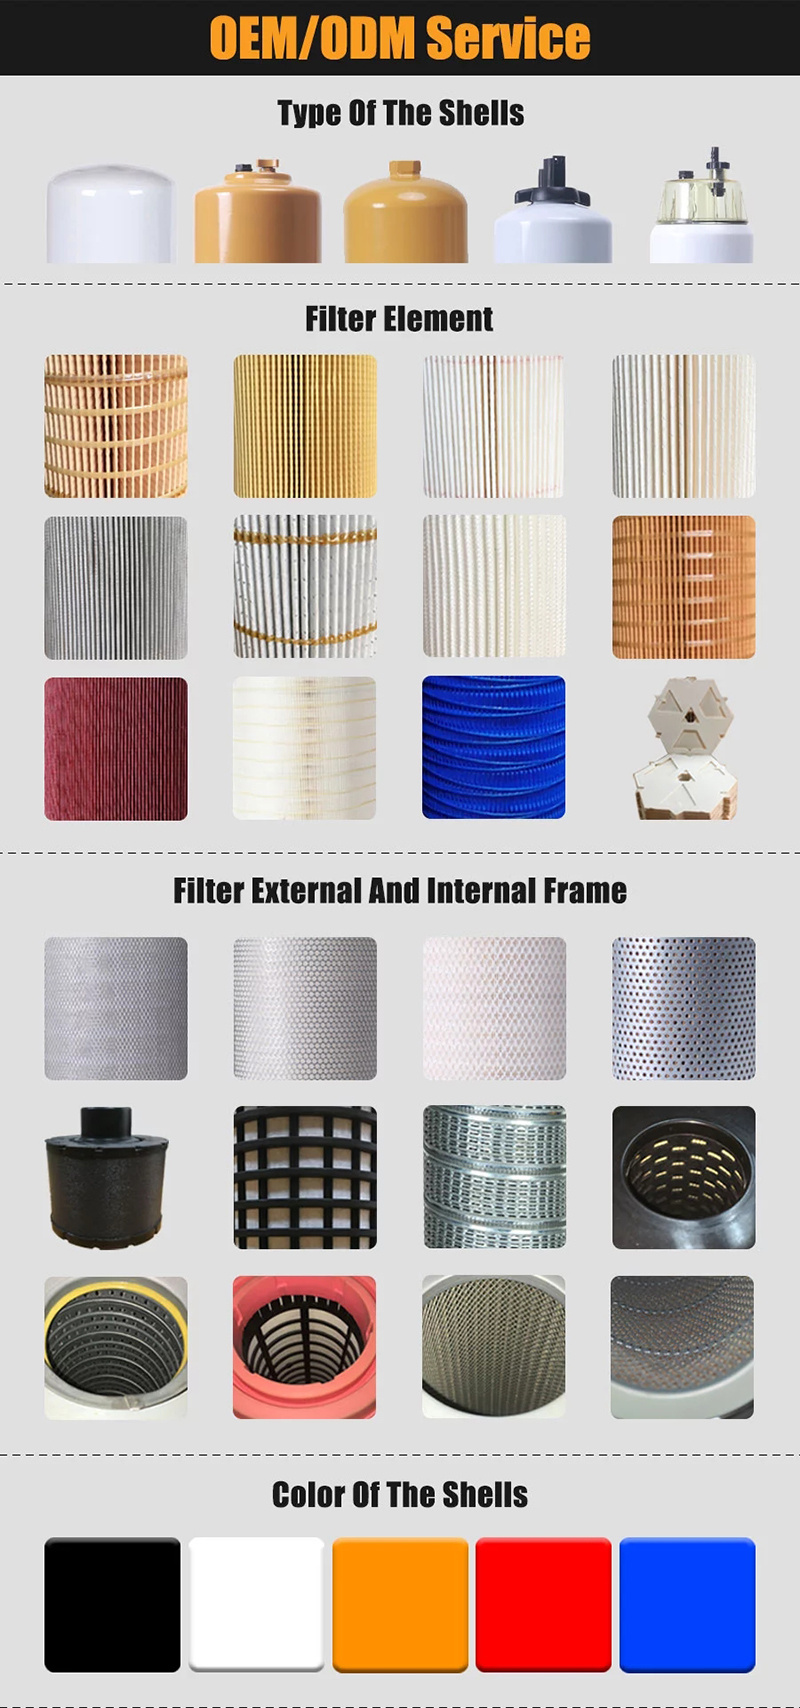 Best Oil Filters Used in Trucks 20779040 Filters for Trucks From Vacuum Truck Filters Maker